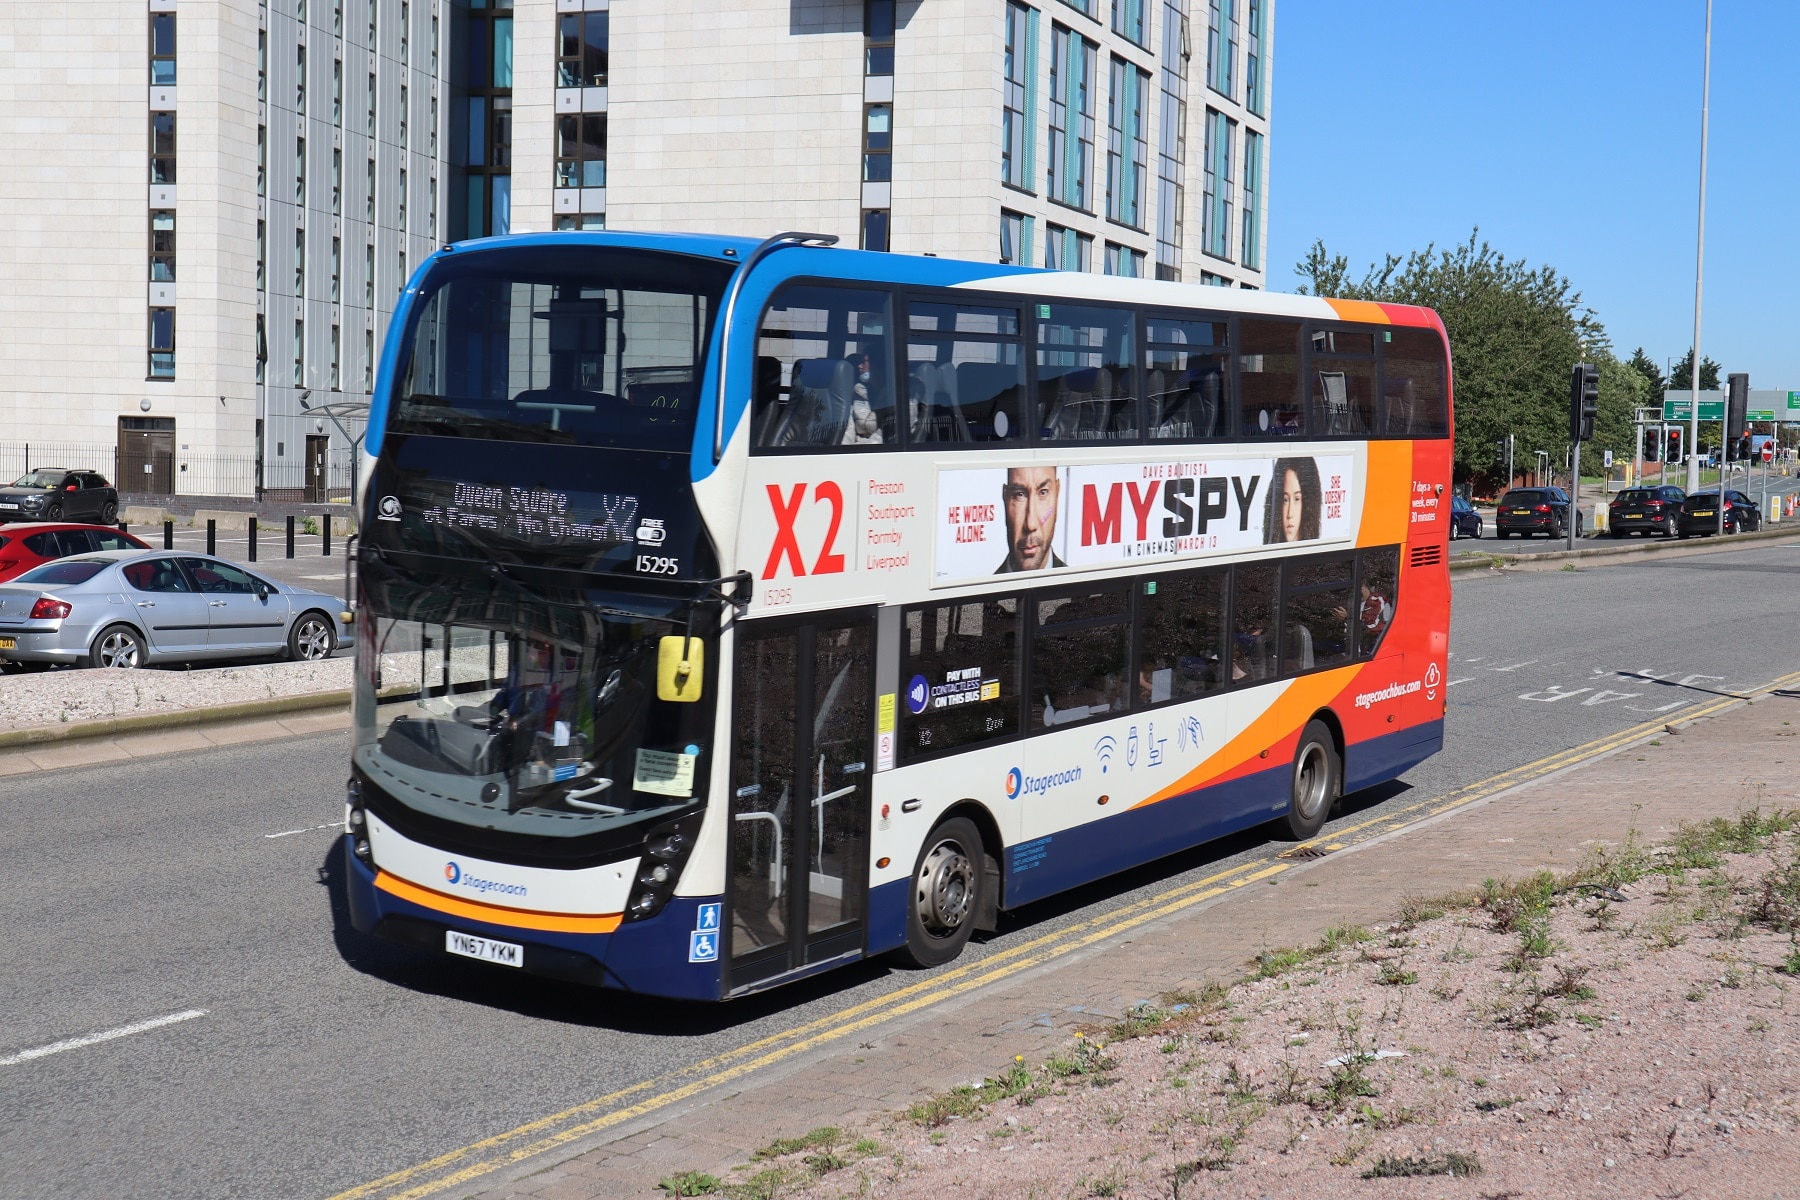 National Express purchase of Stagecoach reaches agreement